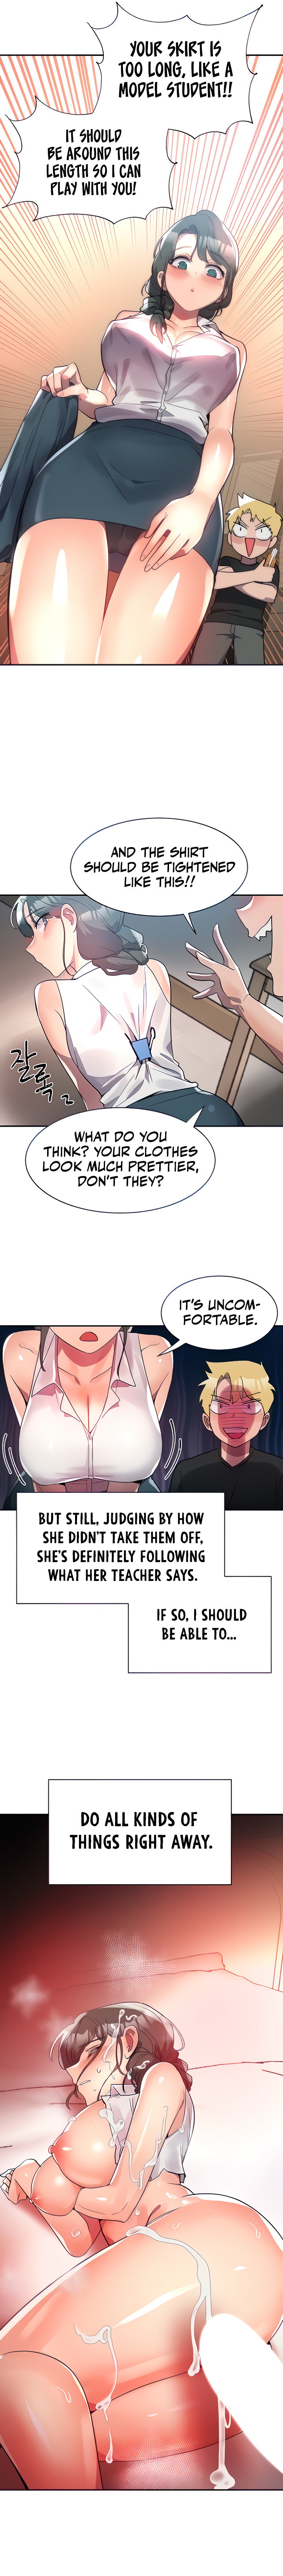 Relationship Reverse Button: Let’s Educate That Arrogant Girl - Chapter 2 Page 3